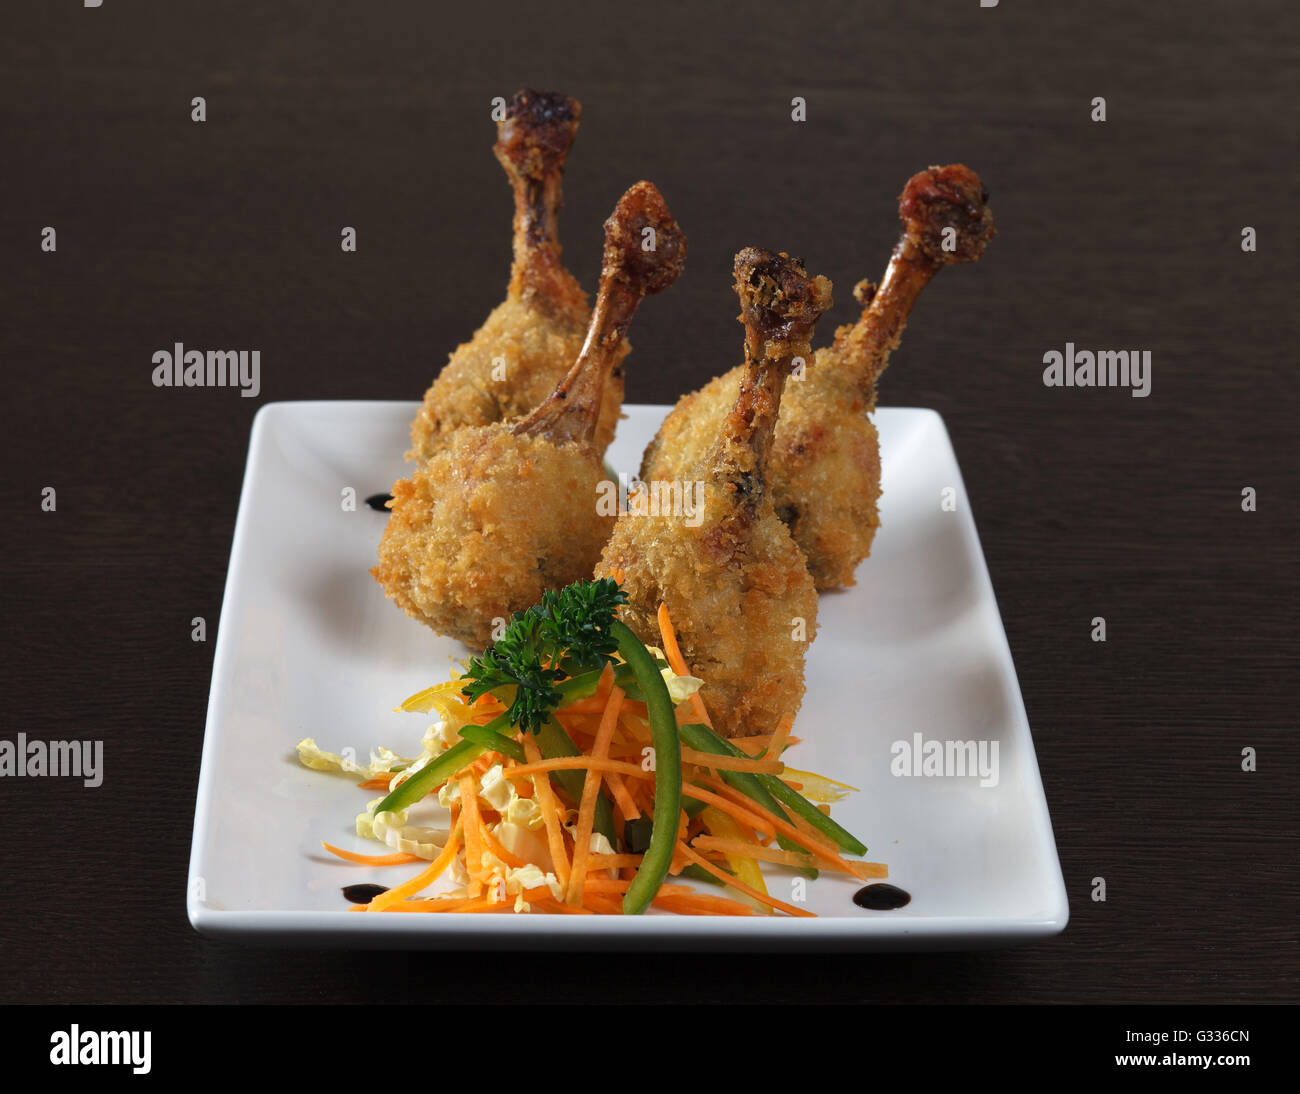 Kara-age. Fried chicken legs breaded and vegetarian side dish with sauce.  Decorating a dish of Japanese and Asian cuisine. Whit Stock Photo